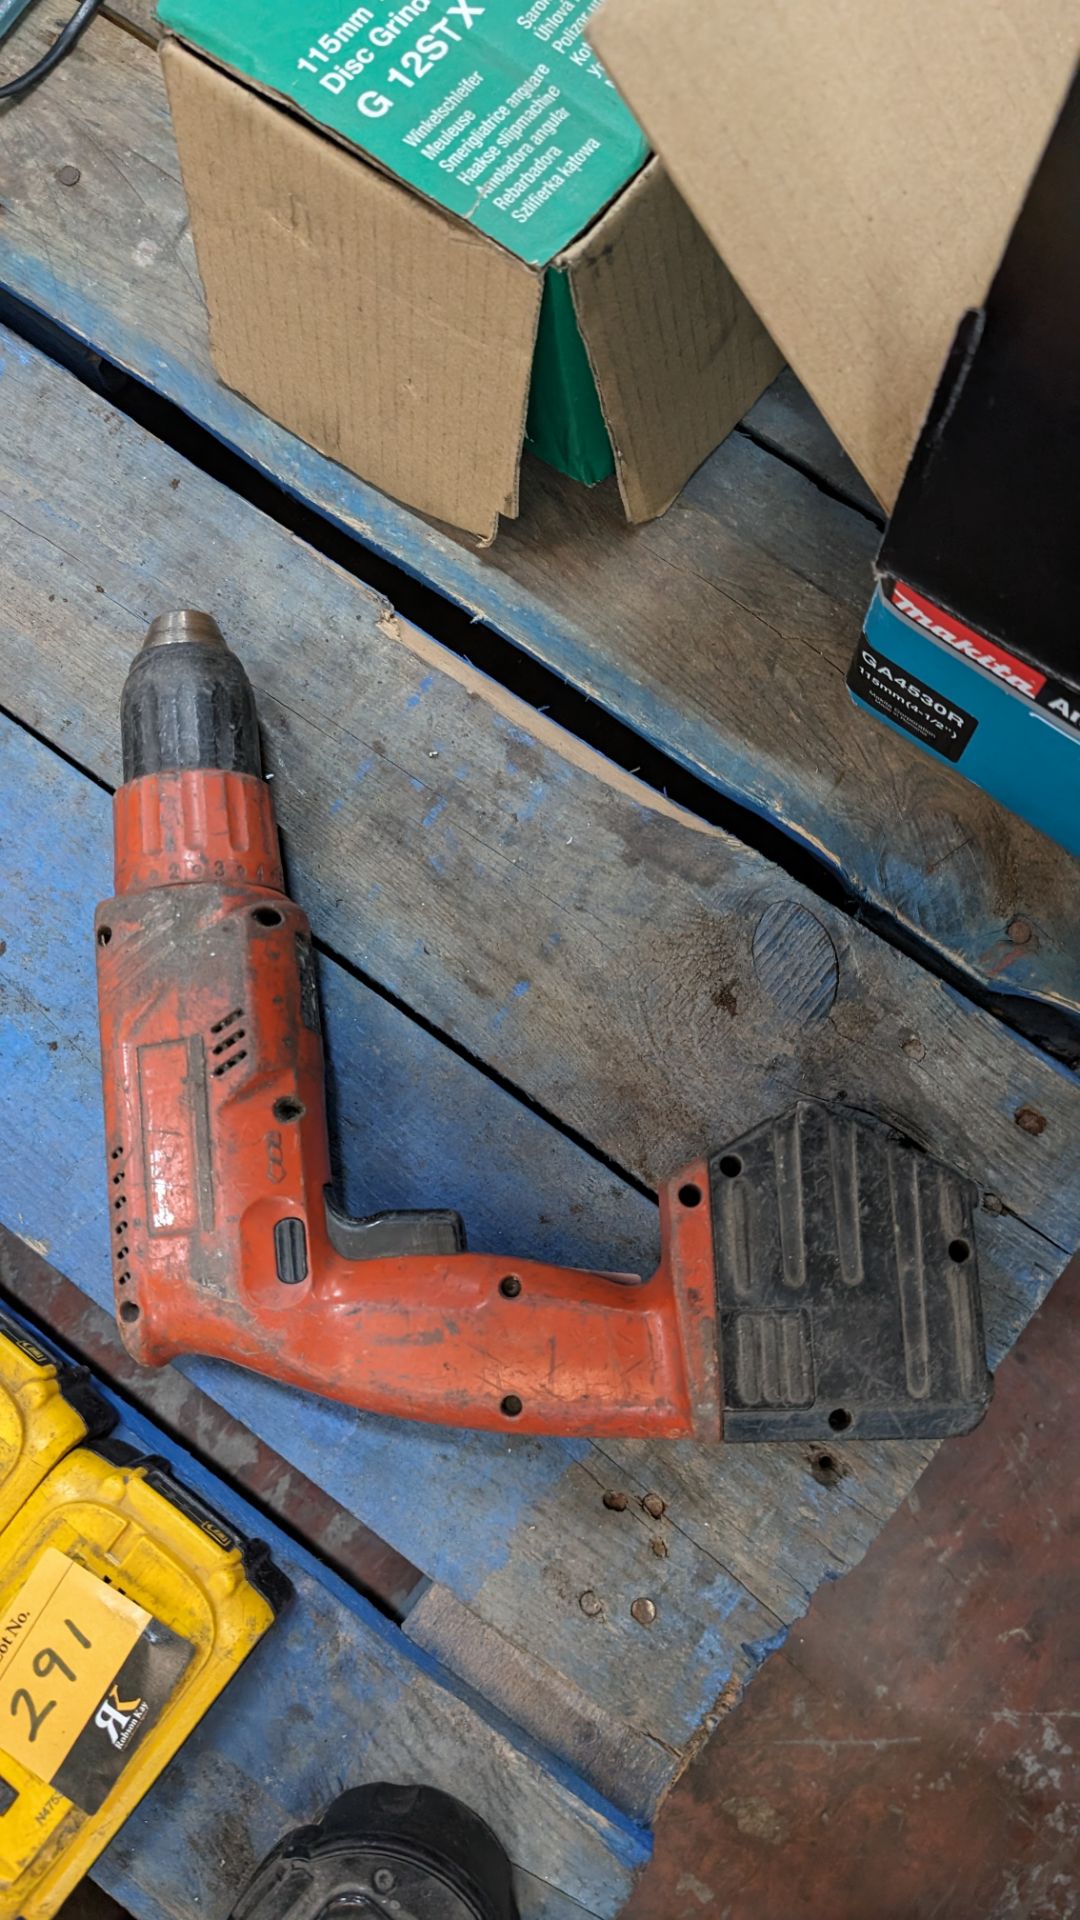 Hilti cordless driver with battery - no charger - Image 4 of 4